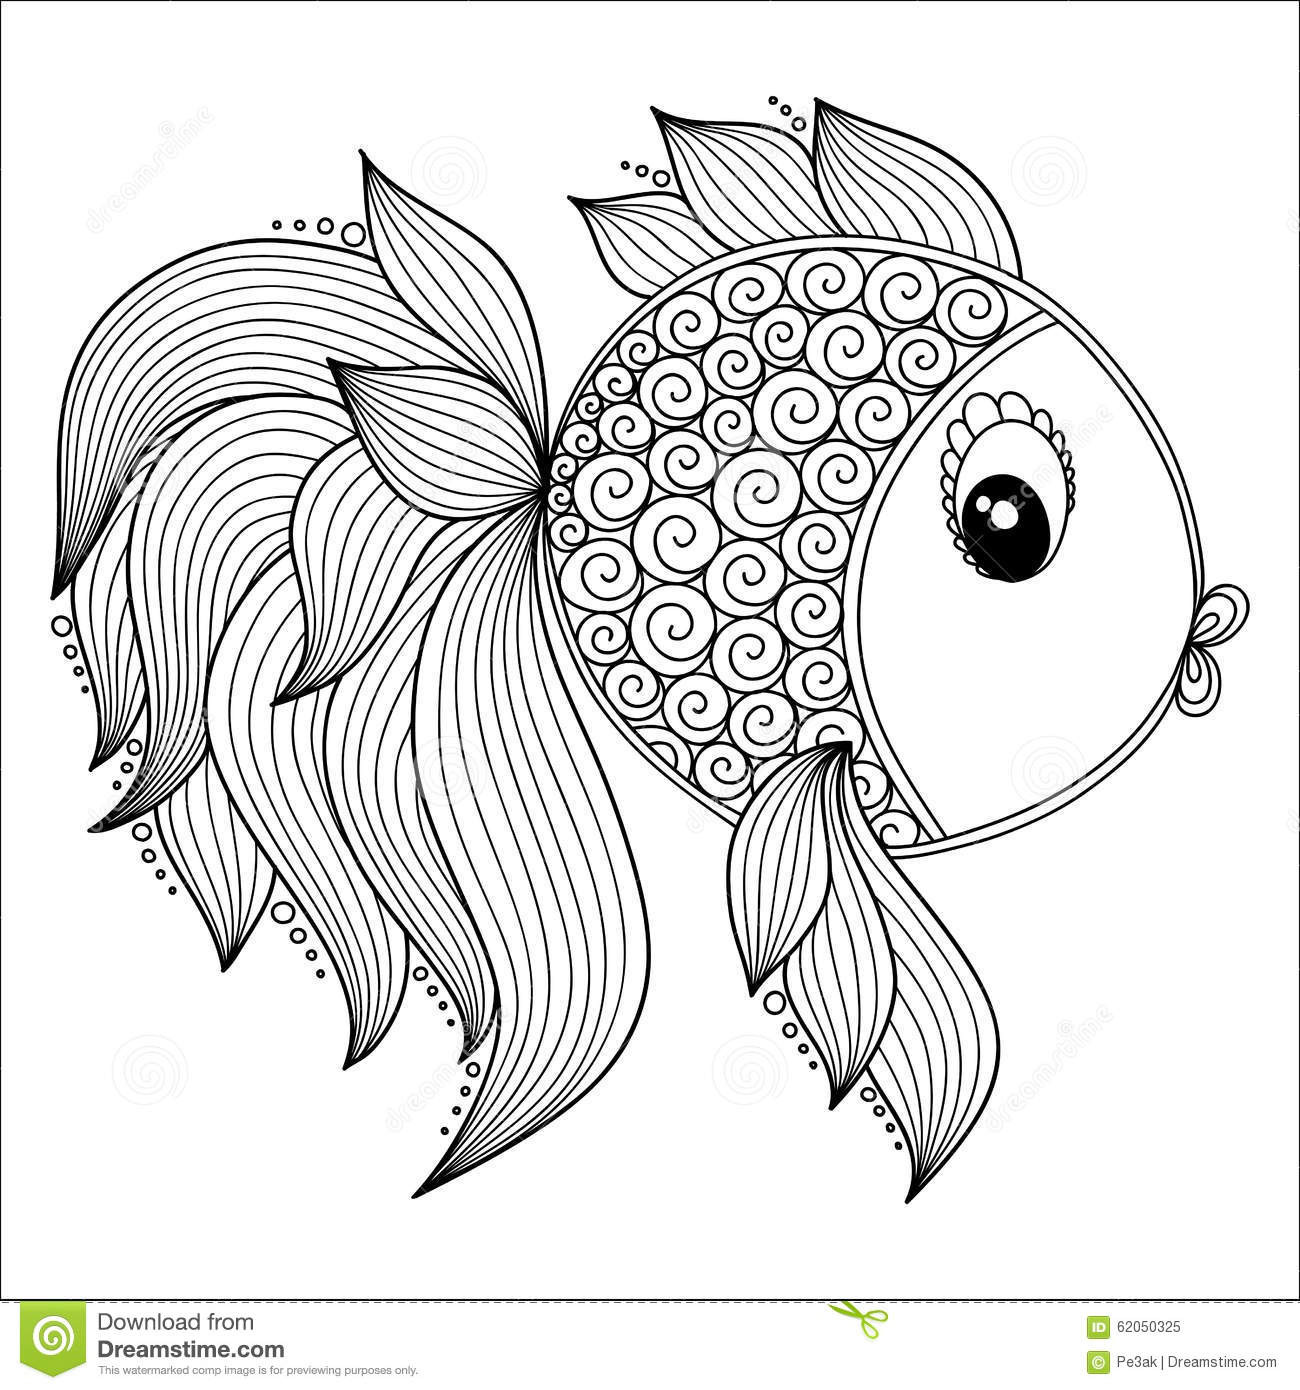 Cute Adult Coloring Pages
 Pattern For Coloring Book Cute Cartoon Fish Stock Vector